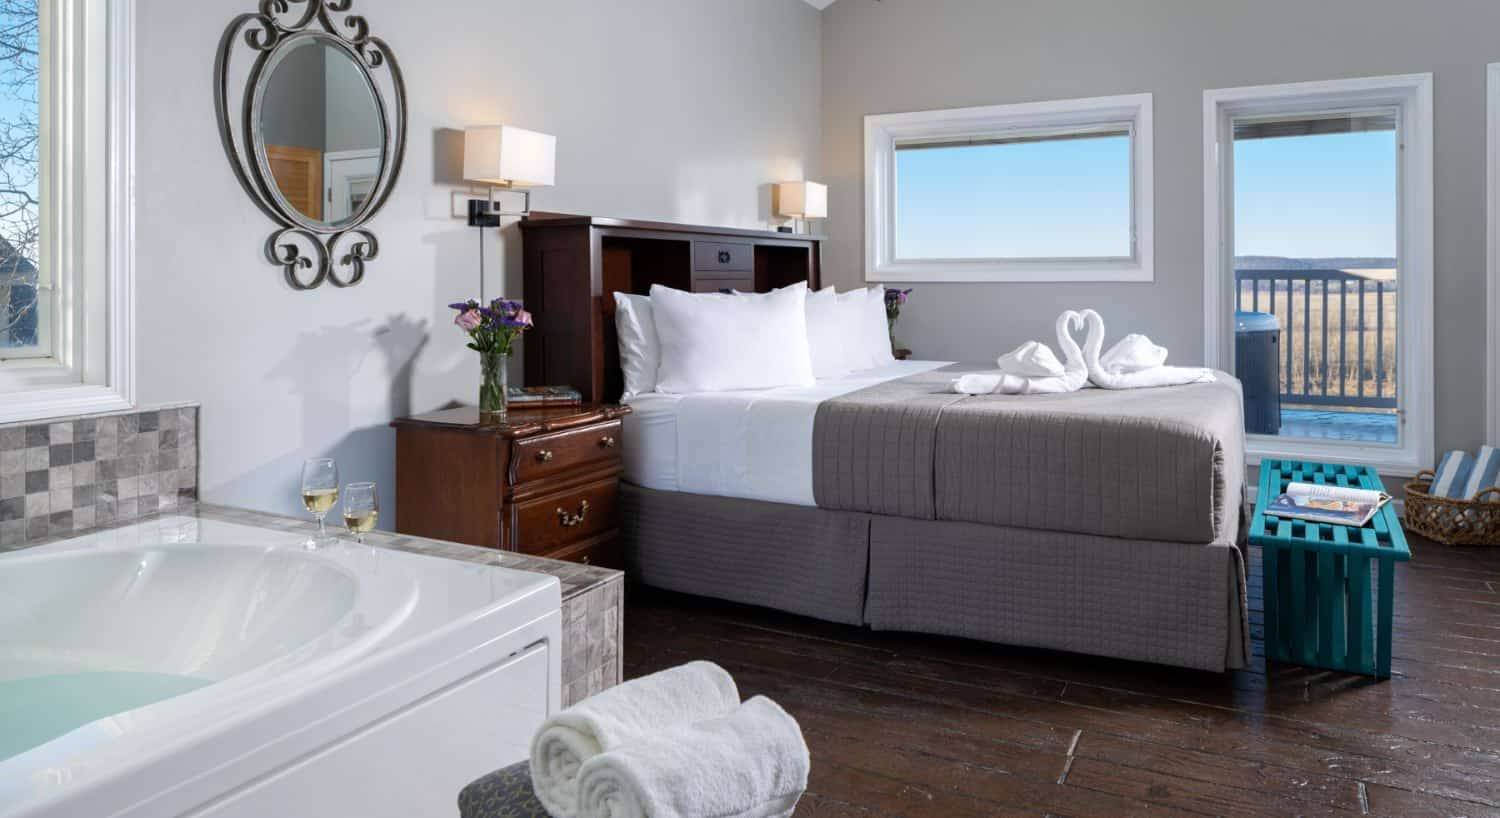 Large bedroom suite with light gray walls, wooden flooring, wooden headboard, white bedding, gray comforter, and jetted tub